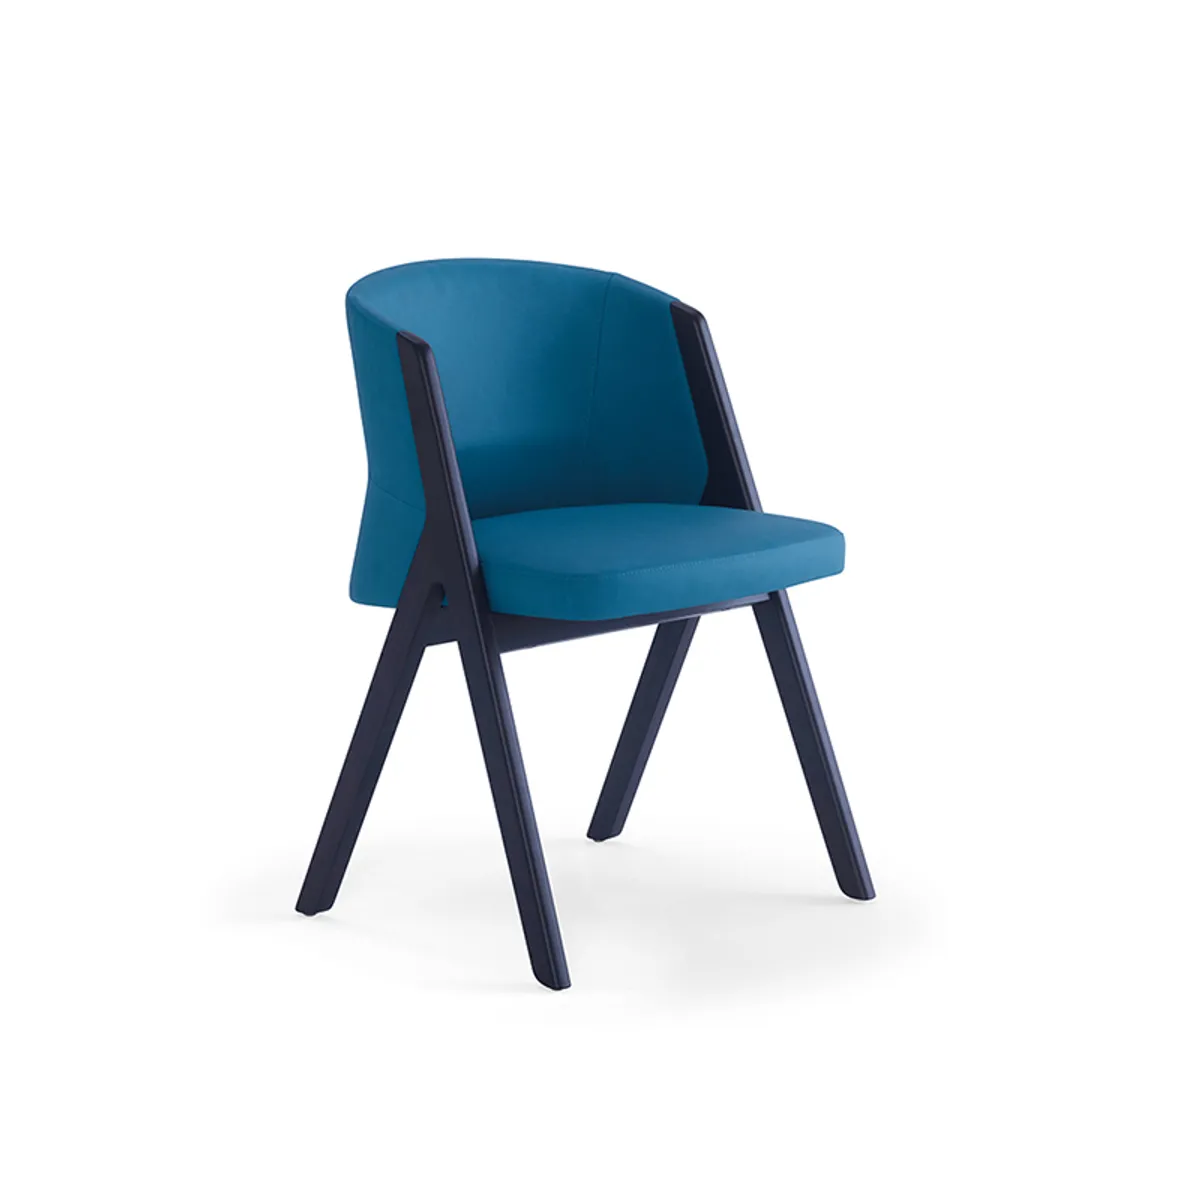 T Bone Rare Verde Chair Inside Out Contracts